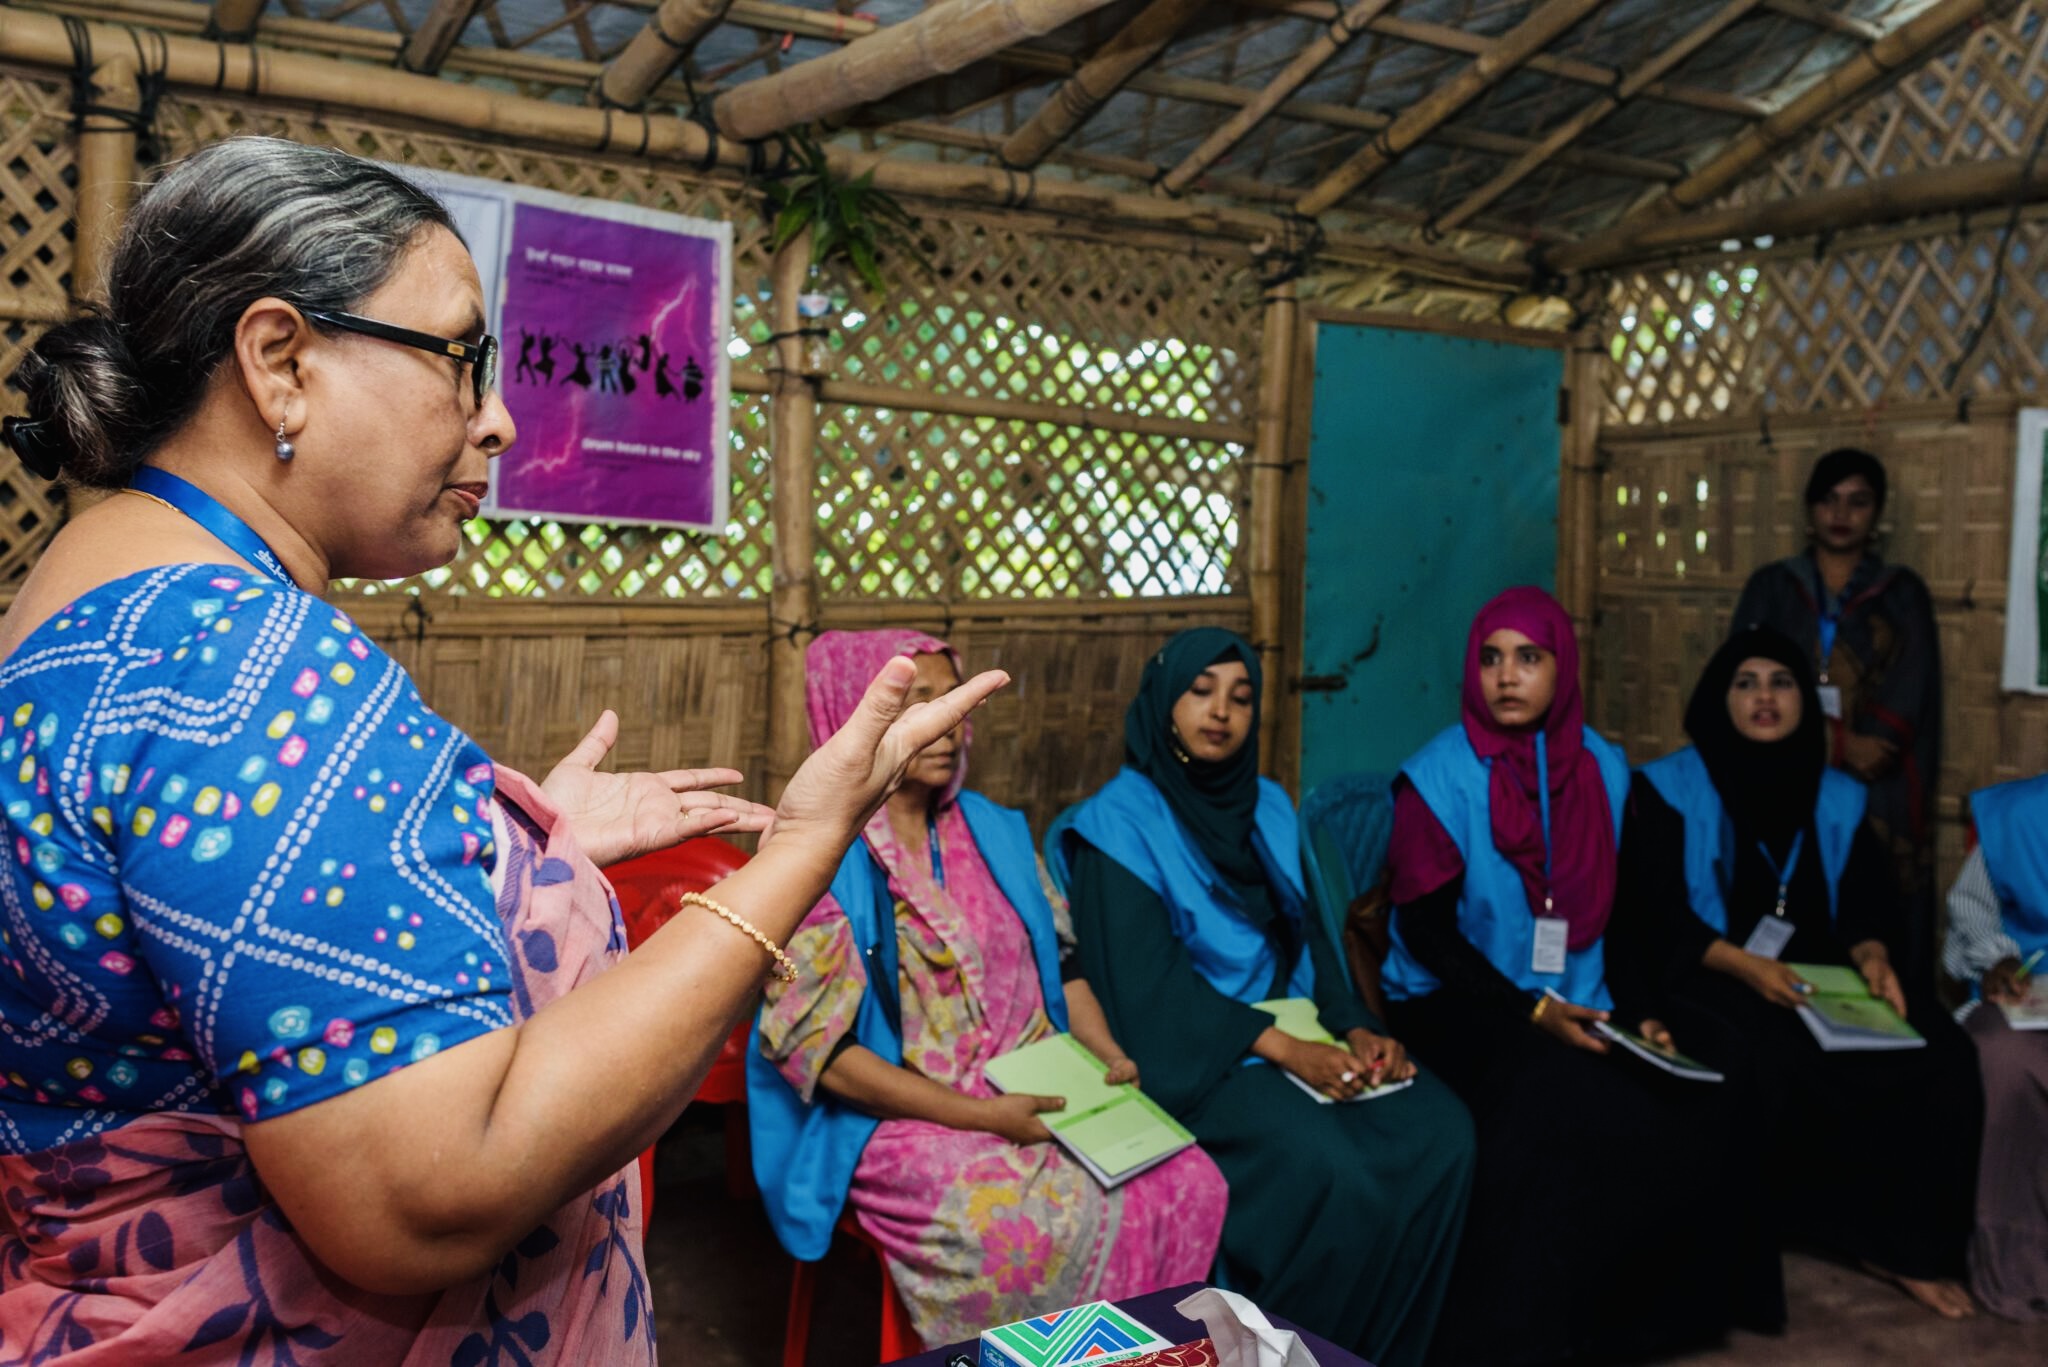 A woman stands in a wooden structure, speaking to several other women seated in a row nearby. Bangladesh Program to Improve Refugees' Reproductive Health Services